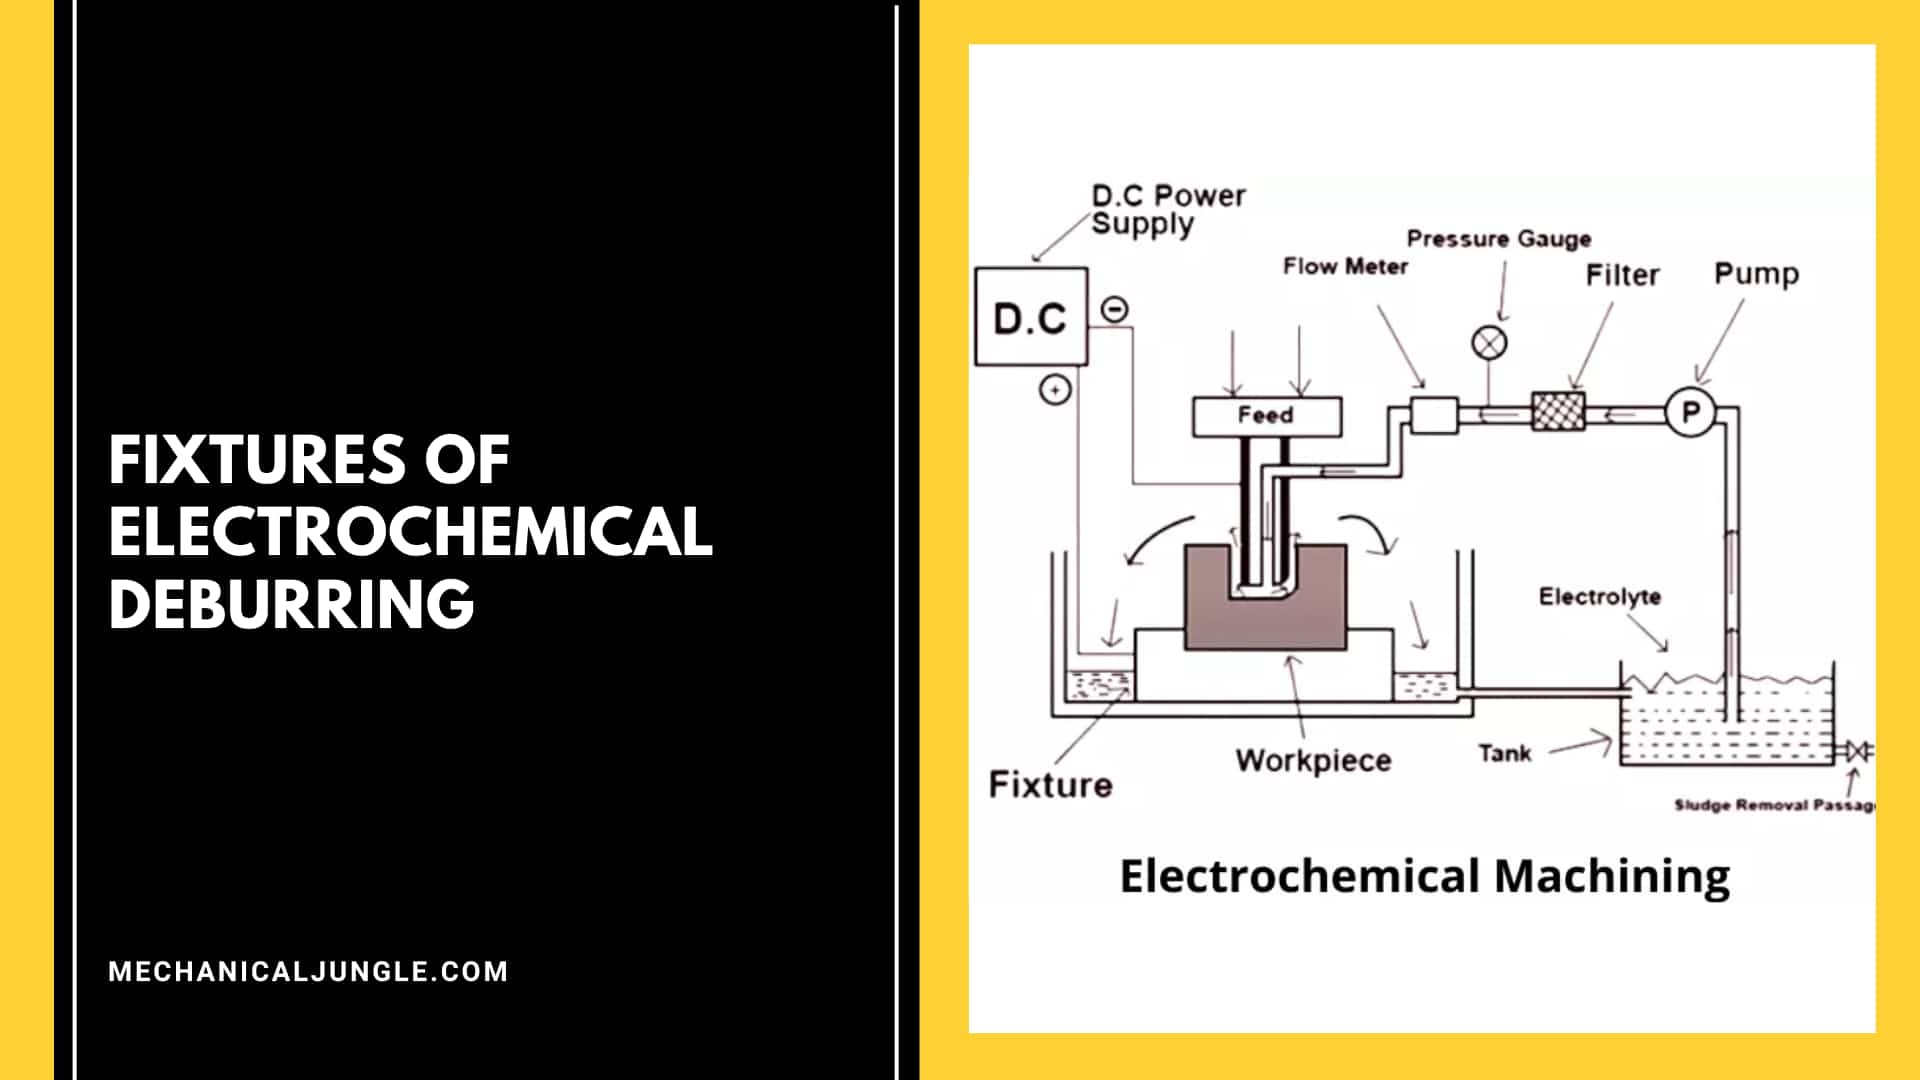 Fixtures of Electrochemical Deburring